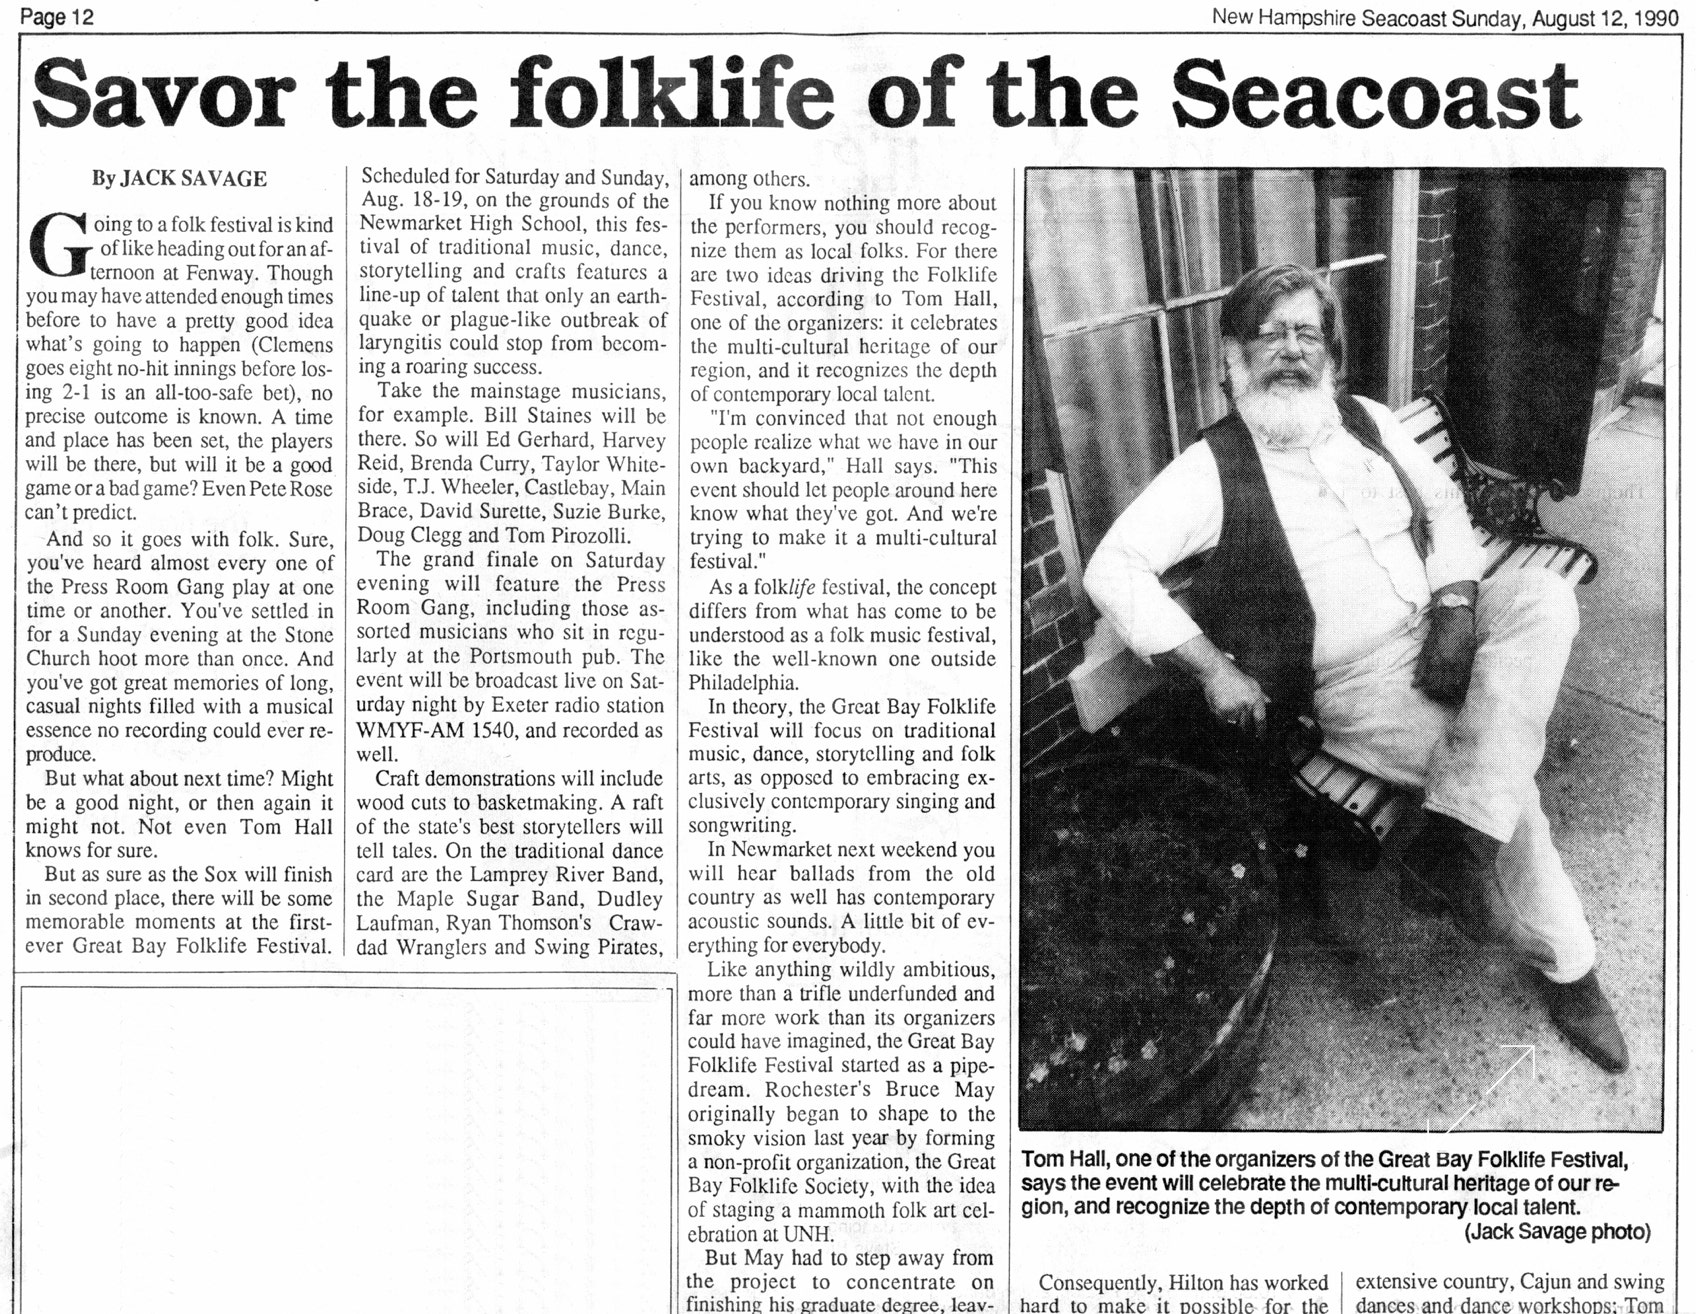 Great Bay Folk Festival article from the New Hampshire Seacoast Sunday, August 12, 1990, image 1 of 3.